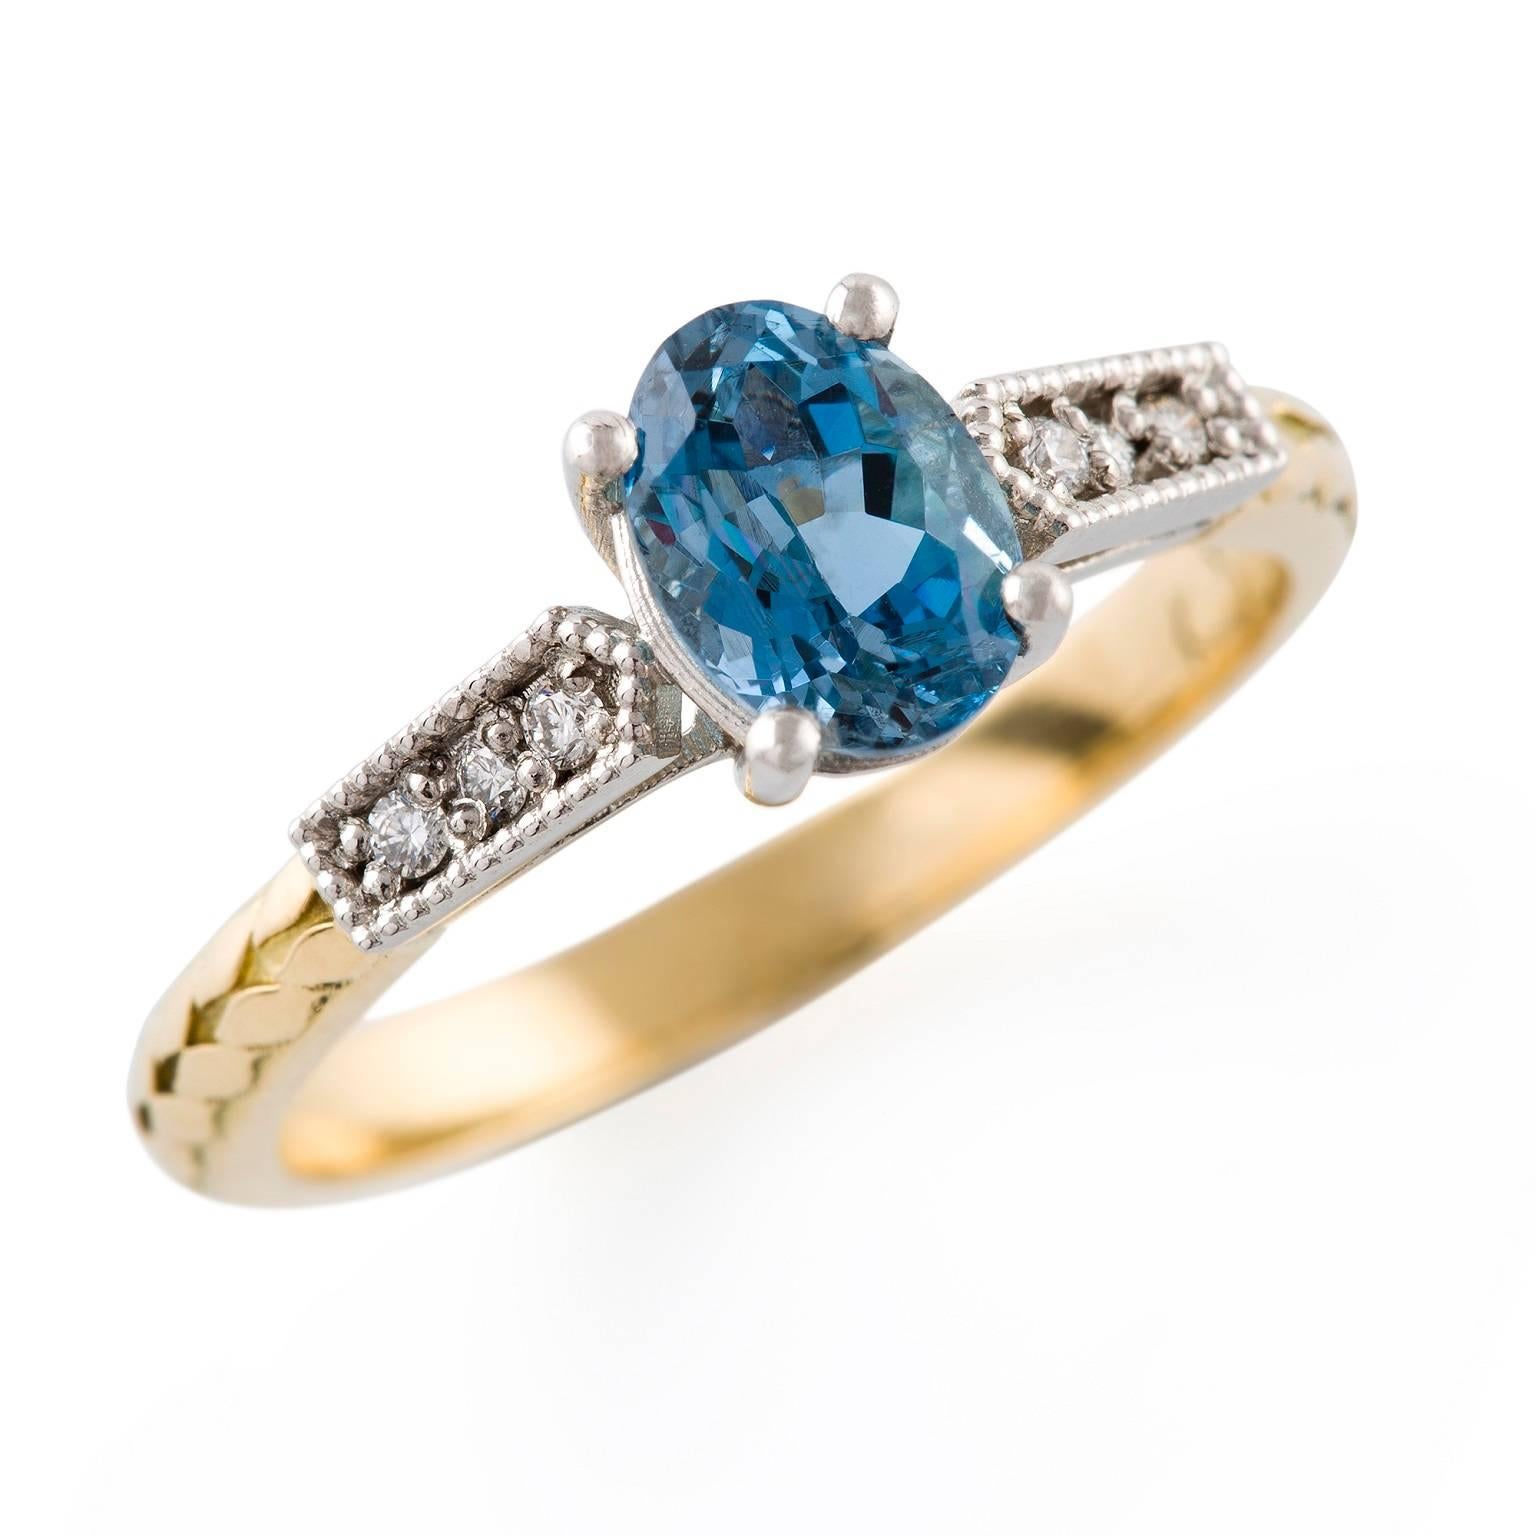 Platino Oro Aquamarina Diamante Ring

This elegant vintage style ring consists of a beautiful four claw set oval cut Aquamarine .Six petite round diamonds have been set into the band on either side of the main settings with lovely mil-grain